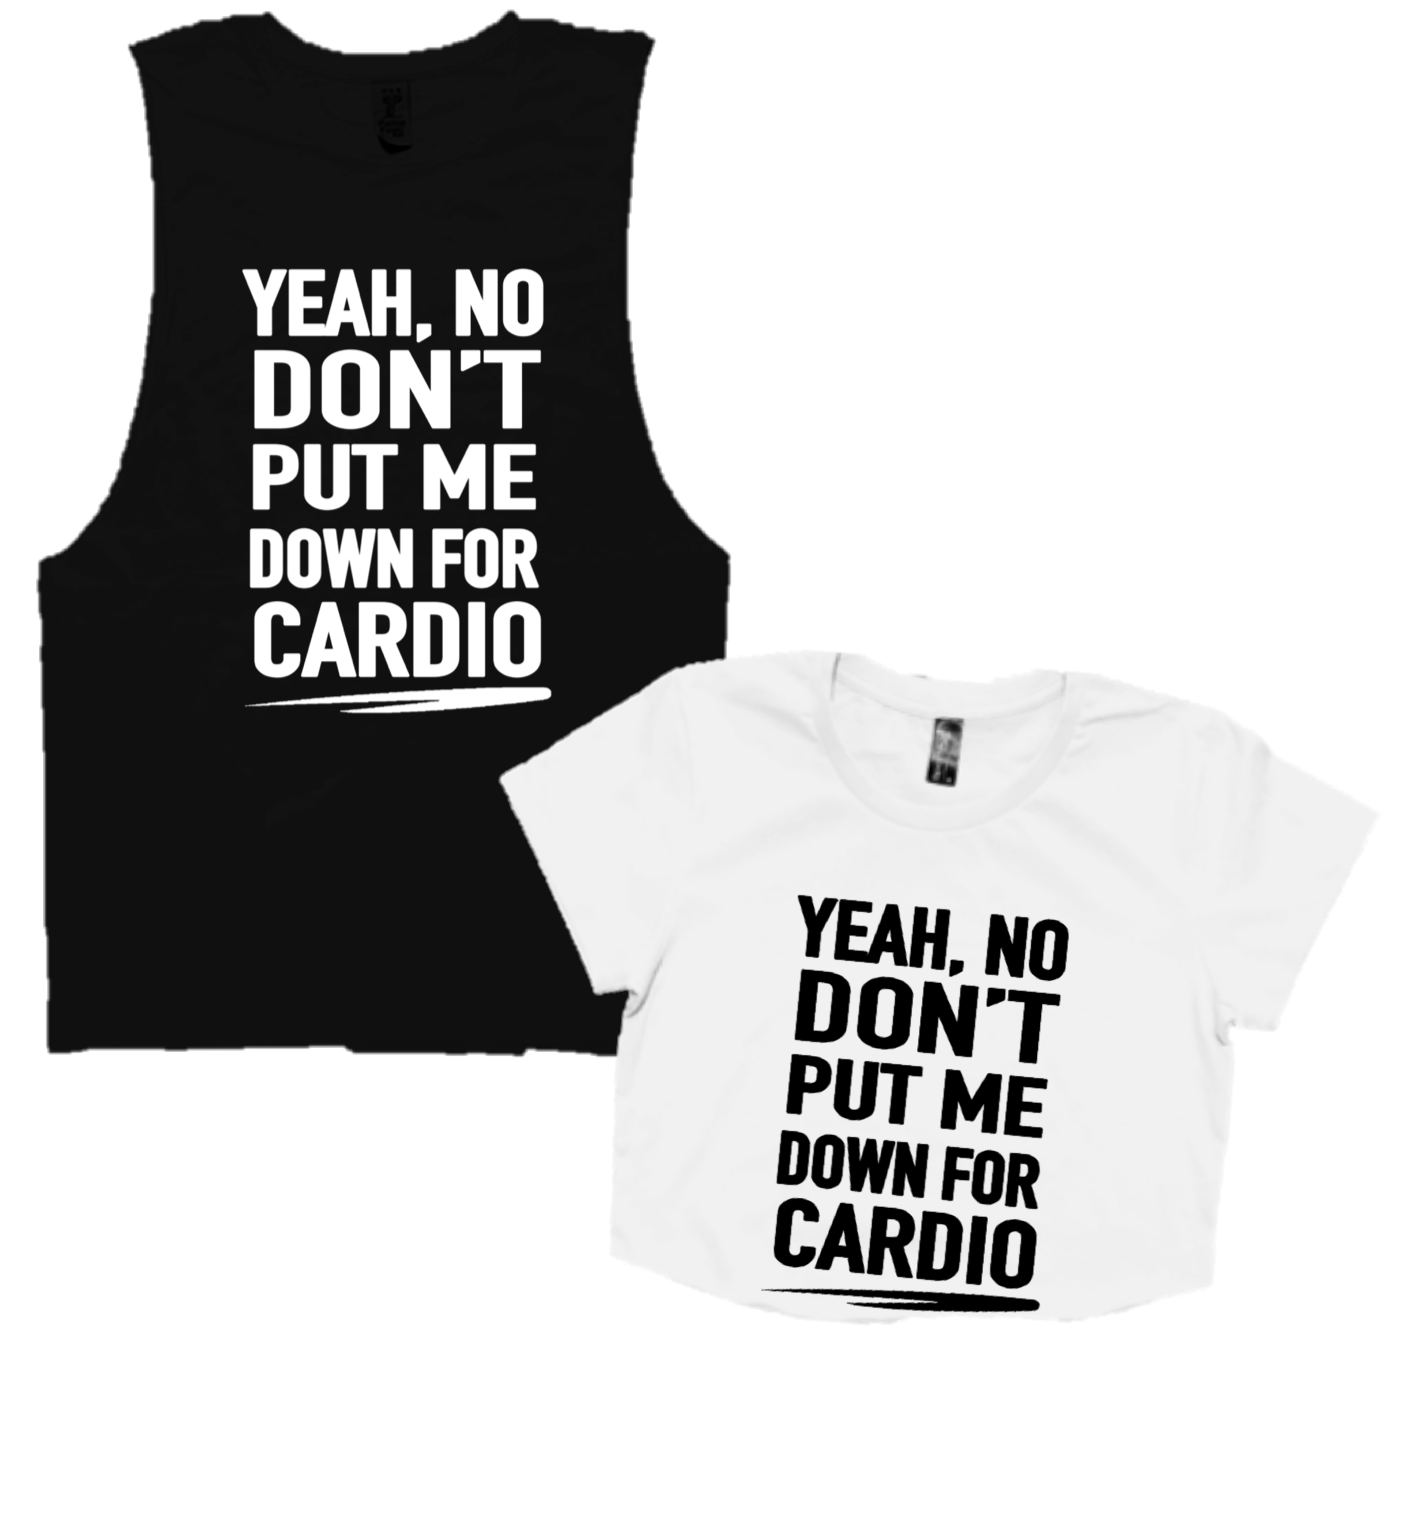 YEAH NO, DON'T PUT ME DOWN FOR CARDIO.